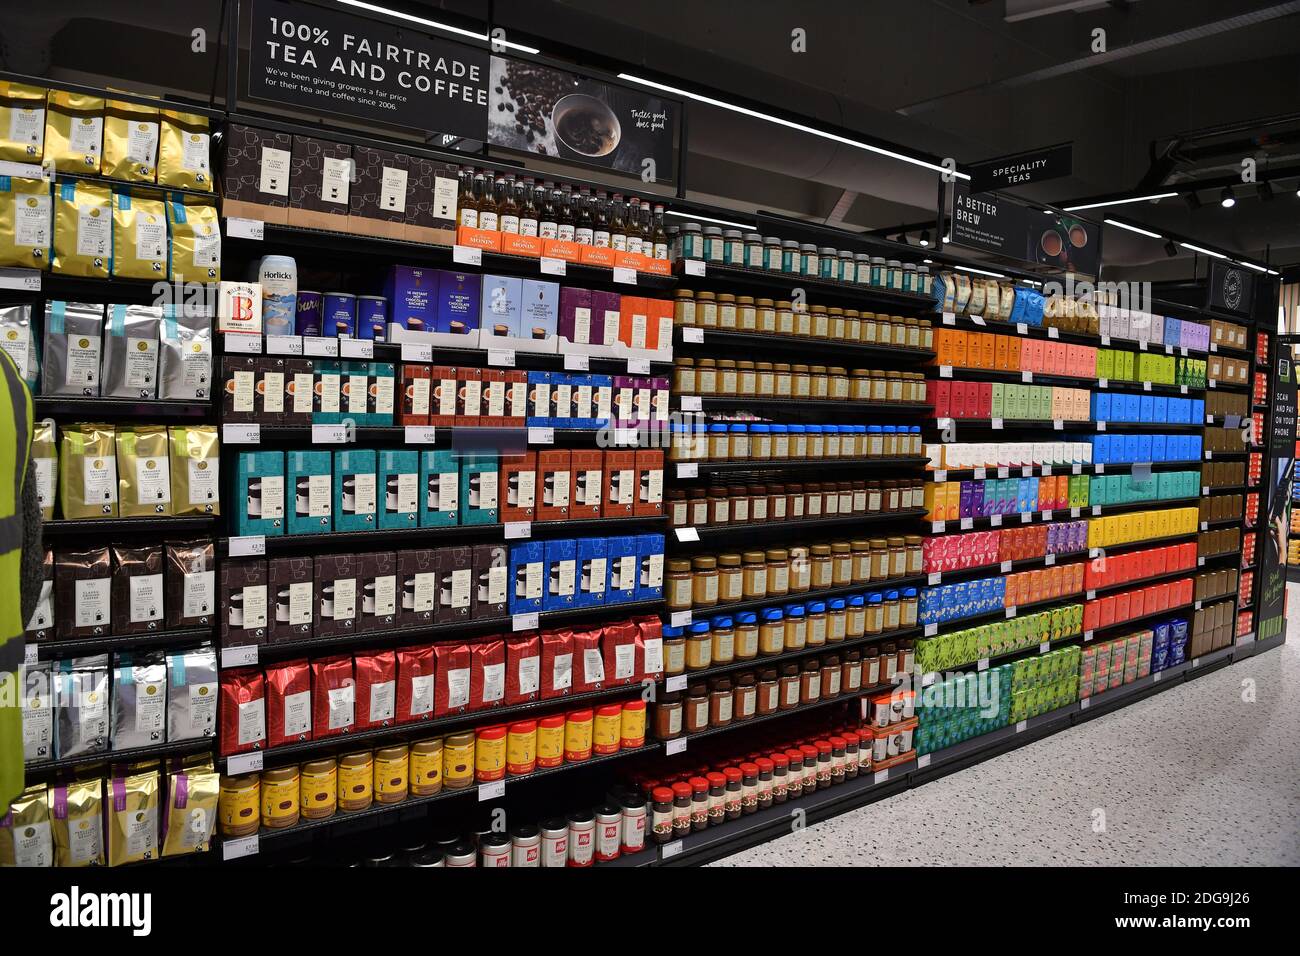 Marks & Spencer M&S Food Shop in Two Rivers, Staines, Surrey, giovedì 2 dicembre 2020. Foto Stock